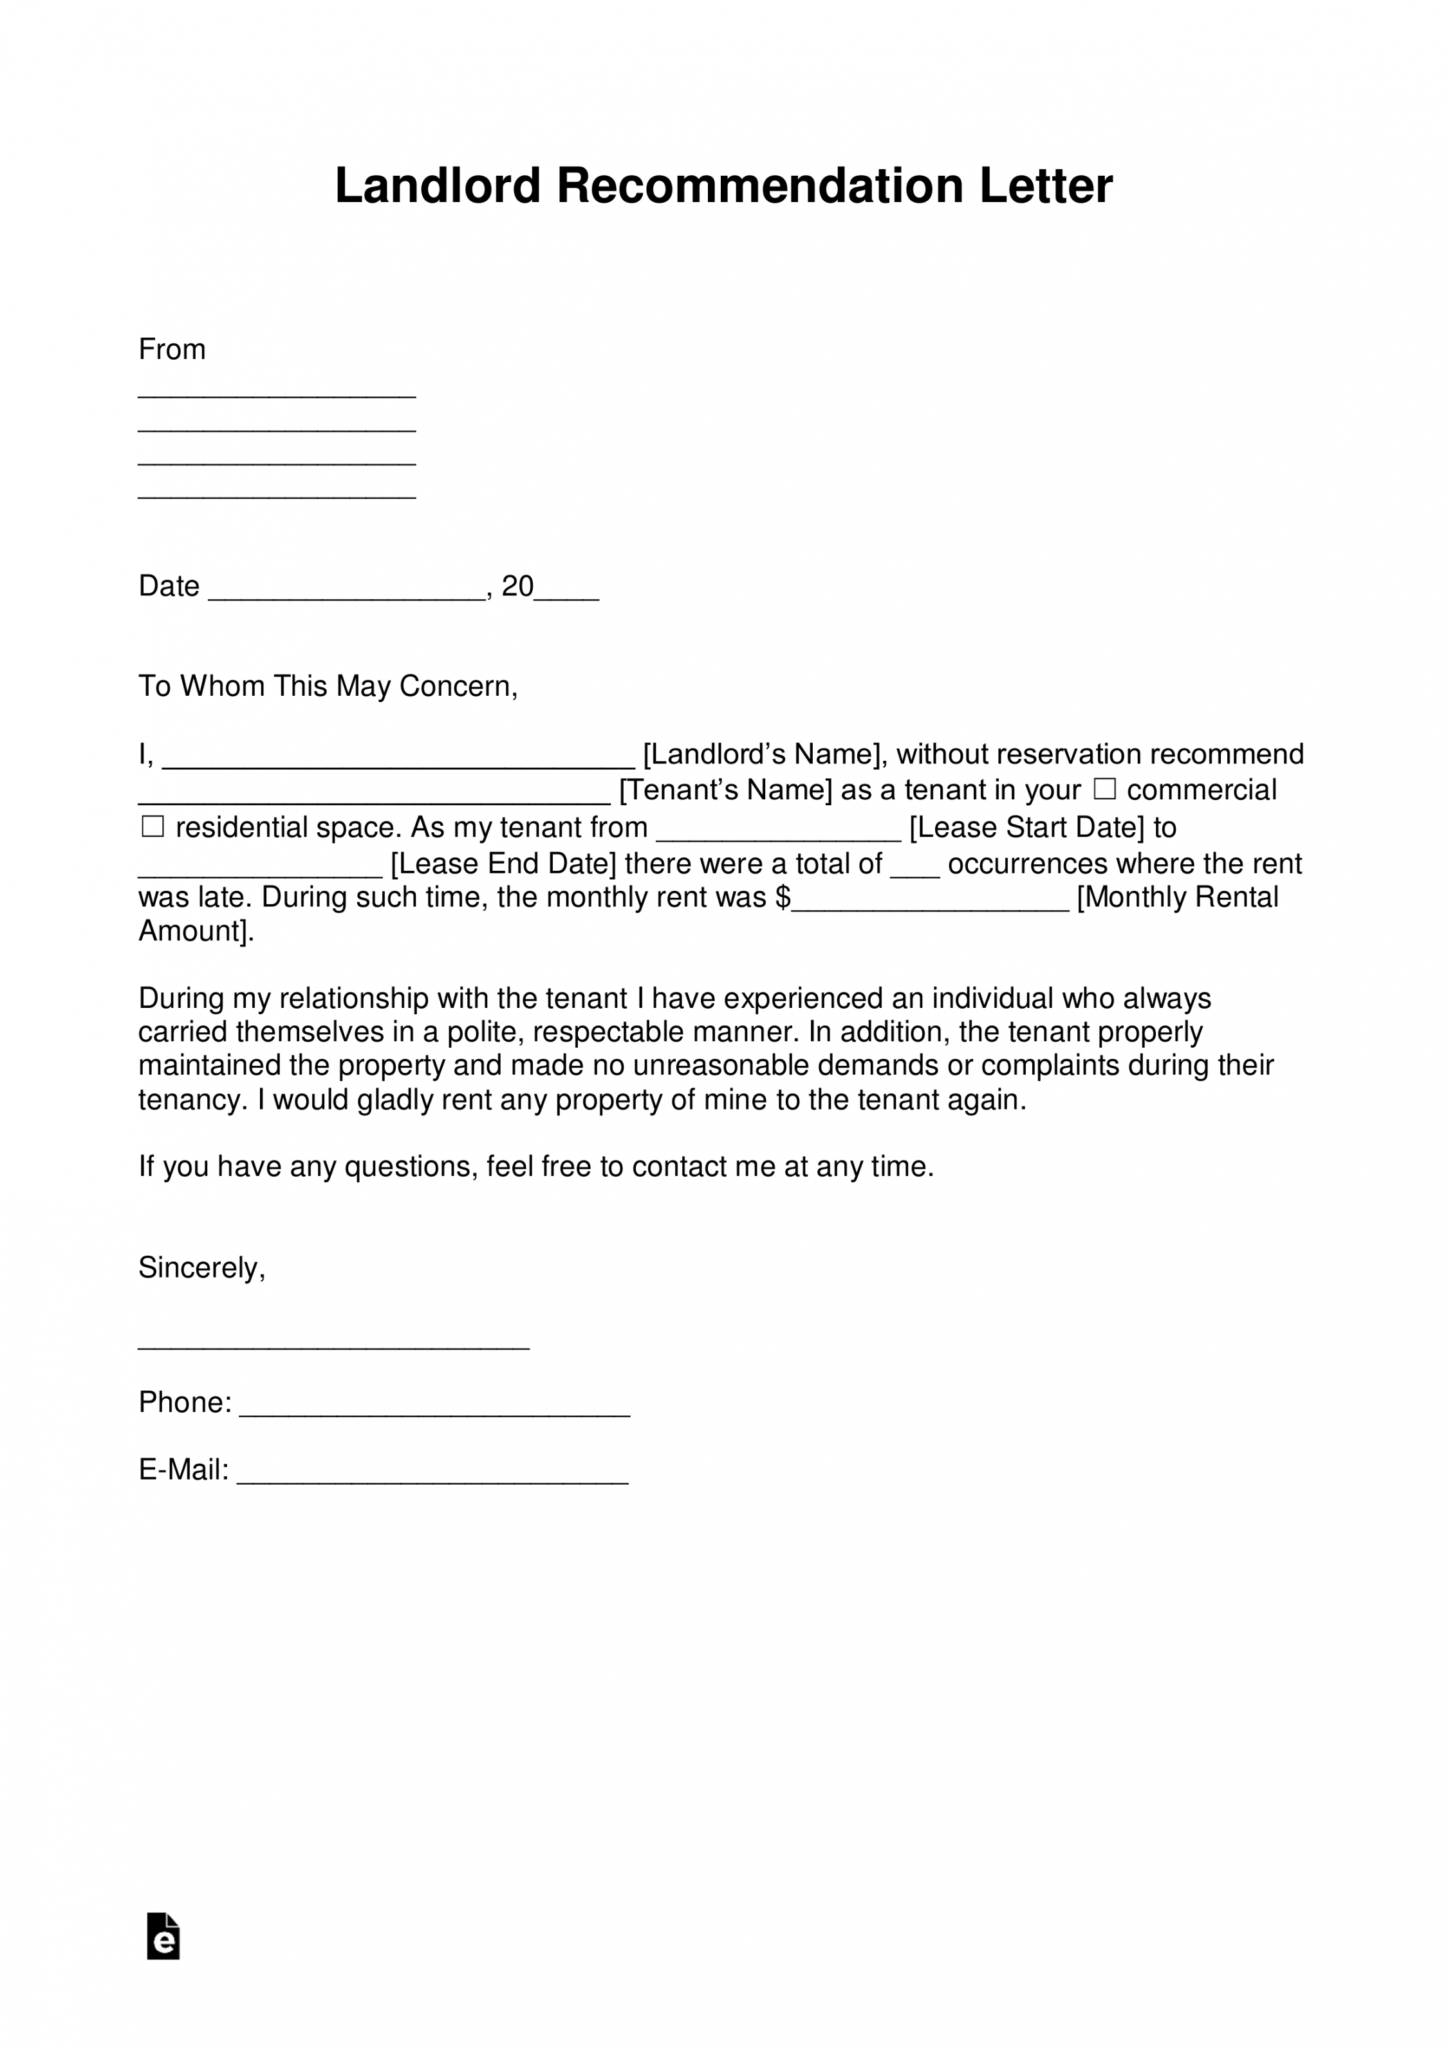 printable-free-landlord-recommendation-letter-for-a-tenant-with-rental-reference-form-template